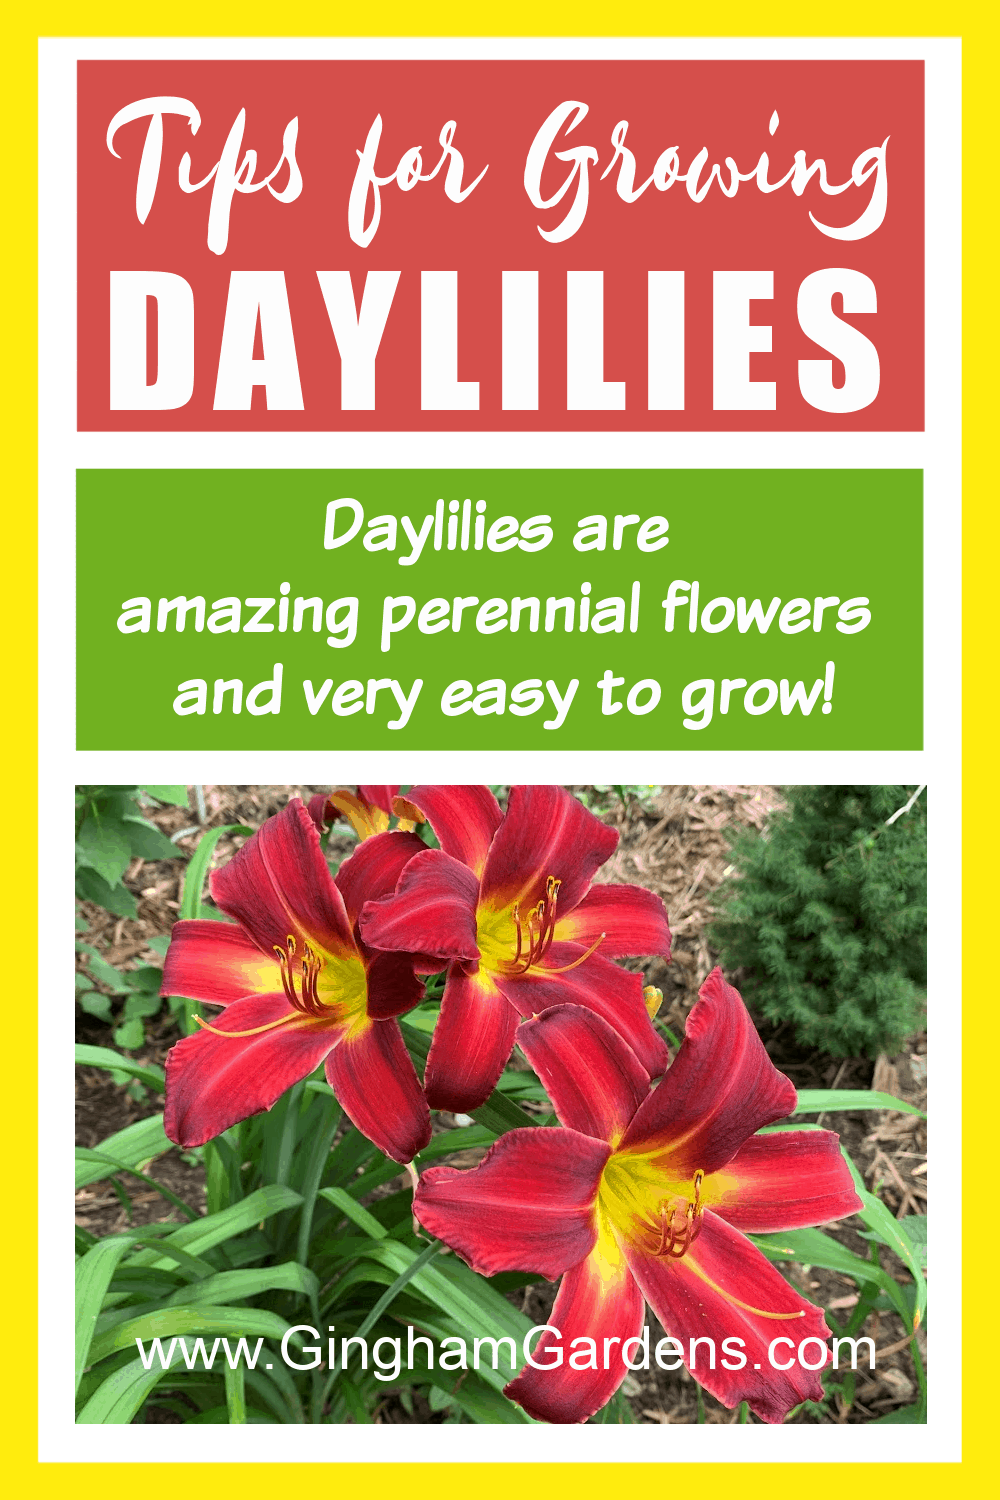 Image of Daylily flowers with text overlay - Tips for Growing Daylilies